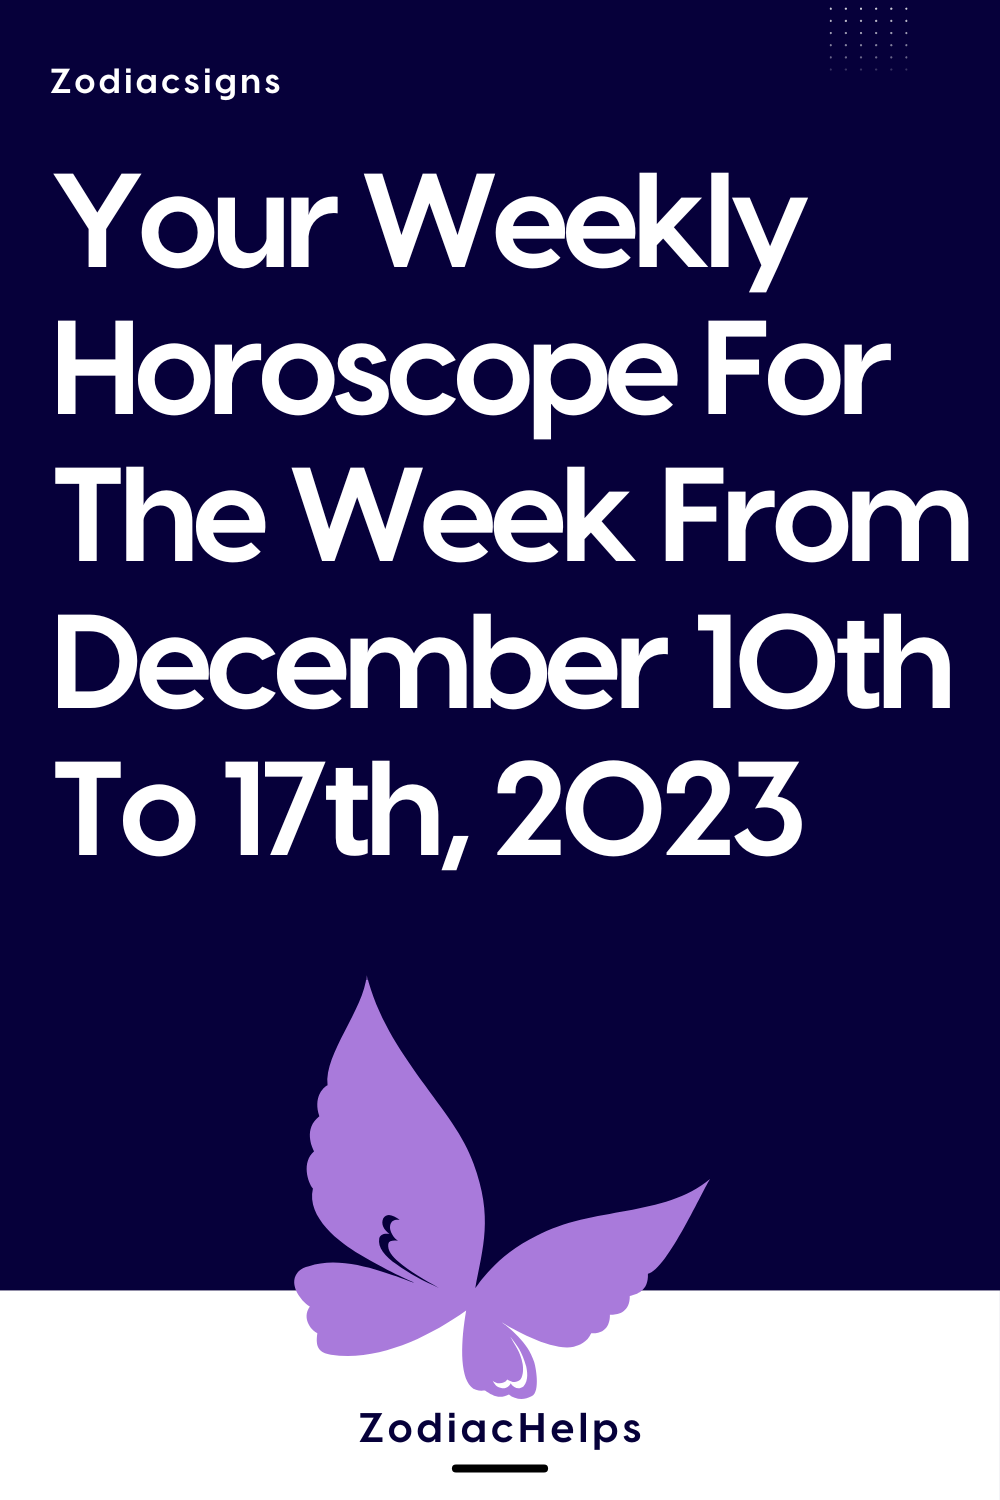 Your Weekly Horoscope For The Week From December 10th To 17th, 2023